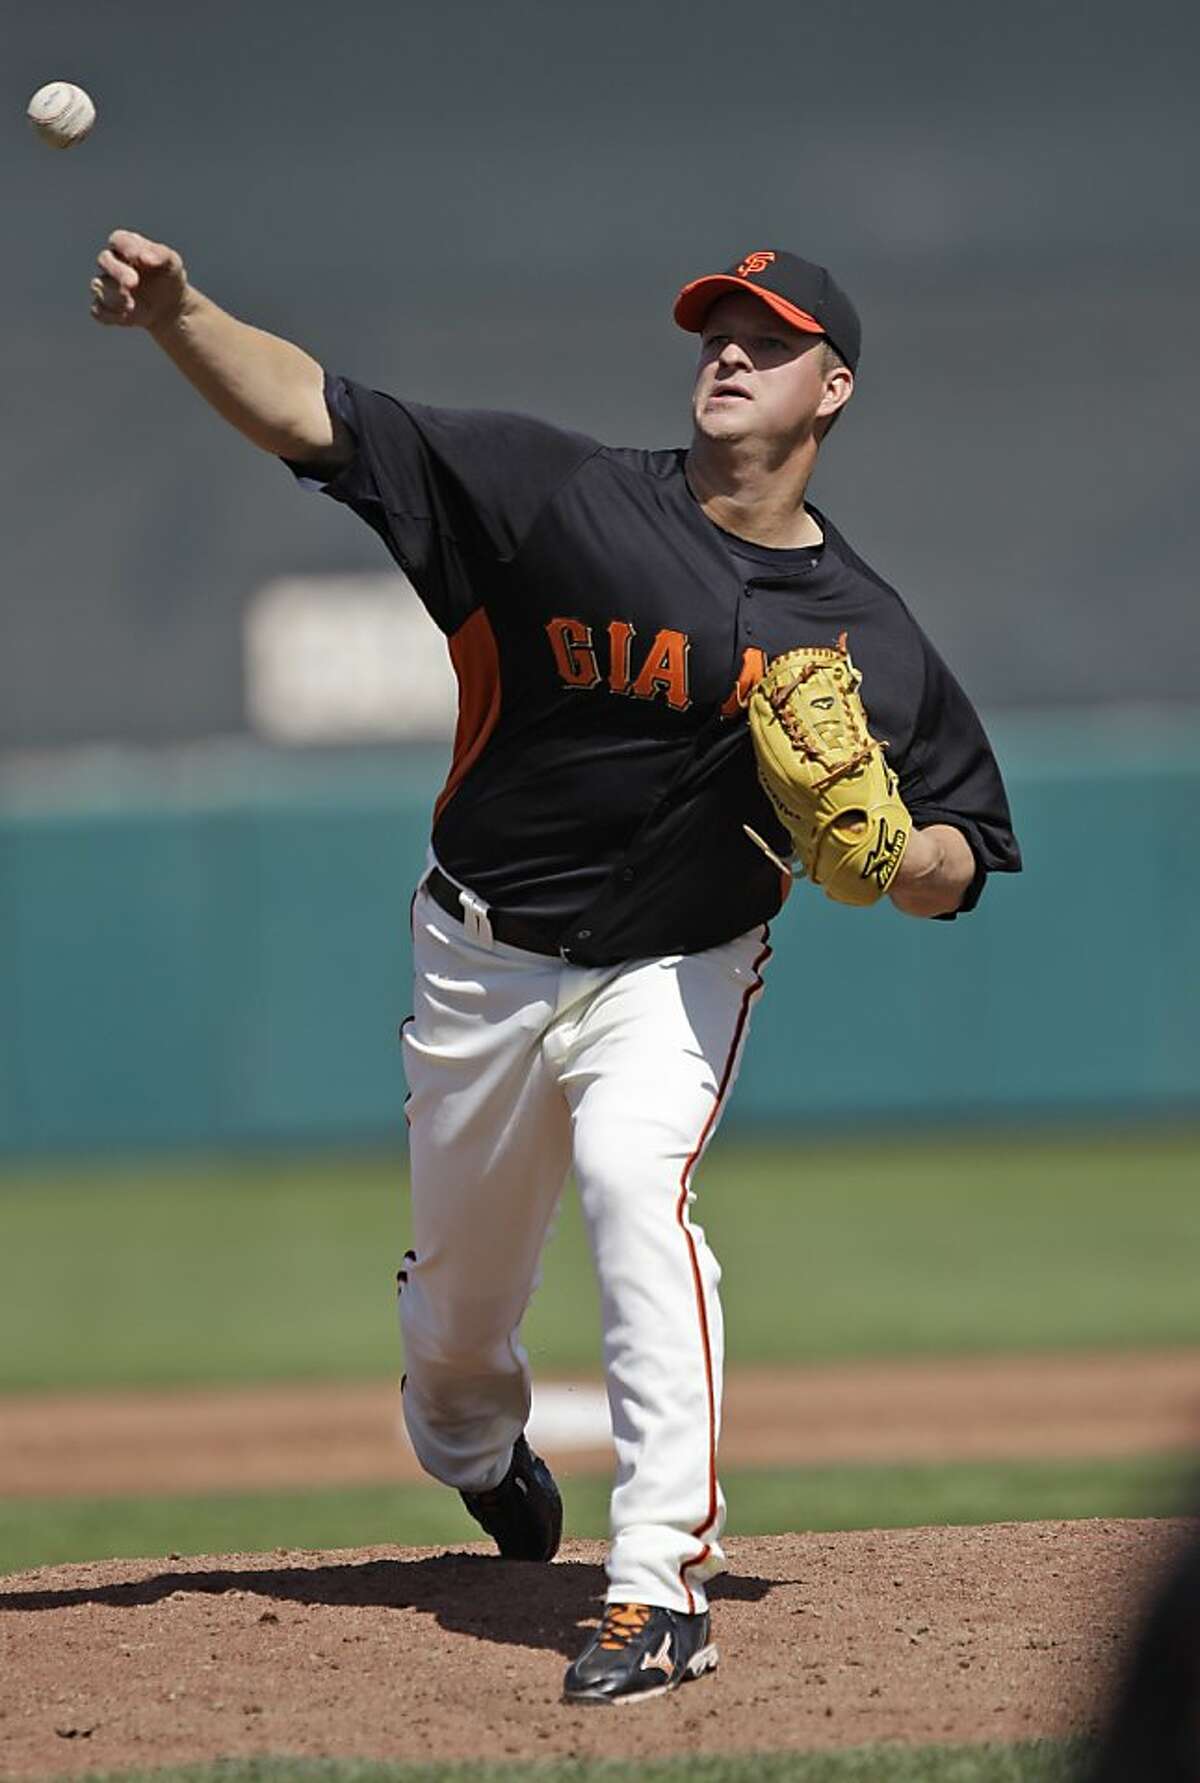 San Francisco Giants starting pitcher Matt Cain throws to the Cincinnati Reds during the third inning of a spring training baseball game Friday, March 9, 2012 in Scottsdale, Ariz. (AP Photo/Marcio Jose Sanchez)